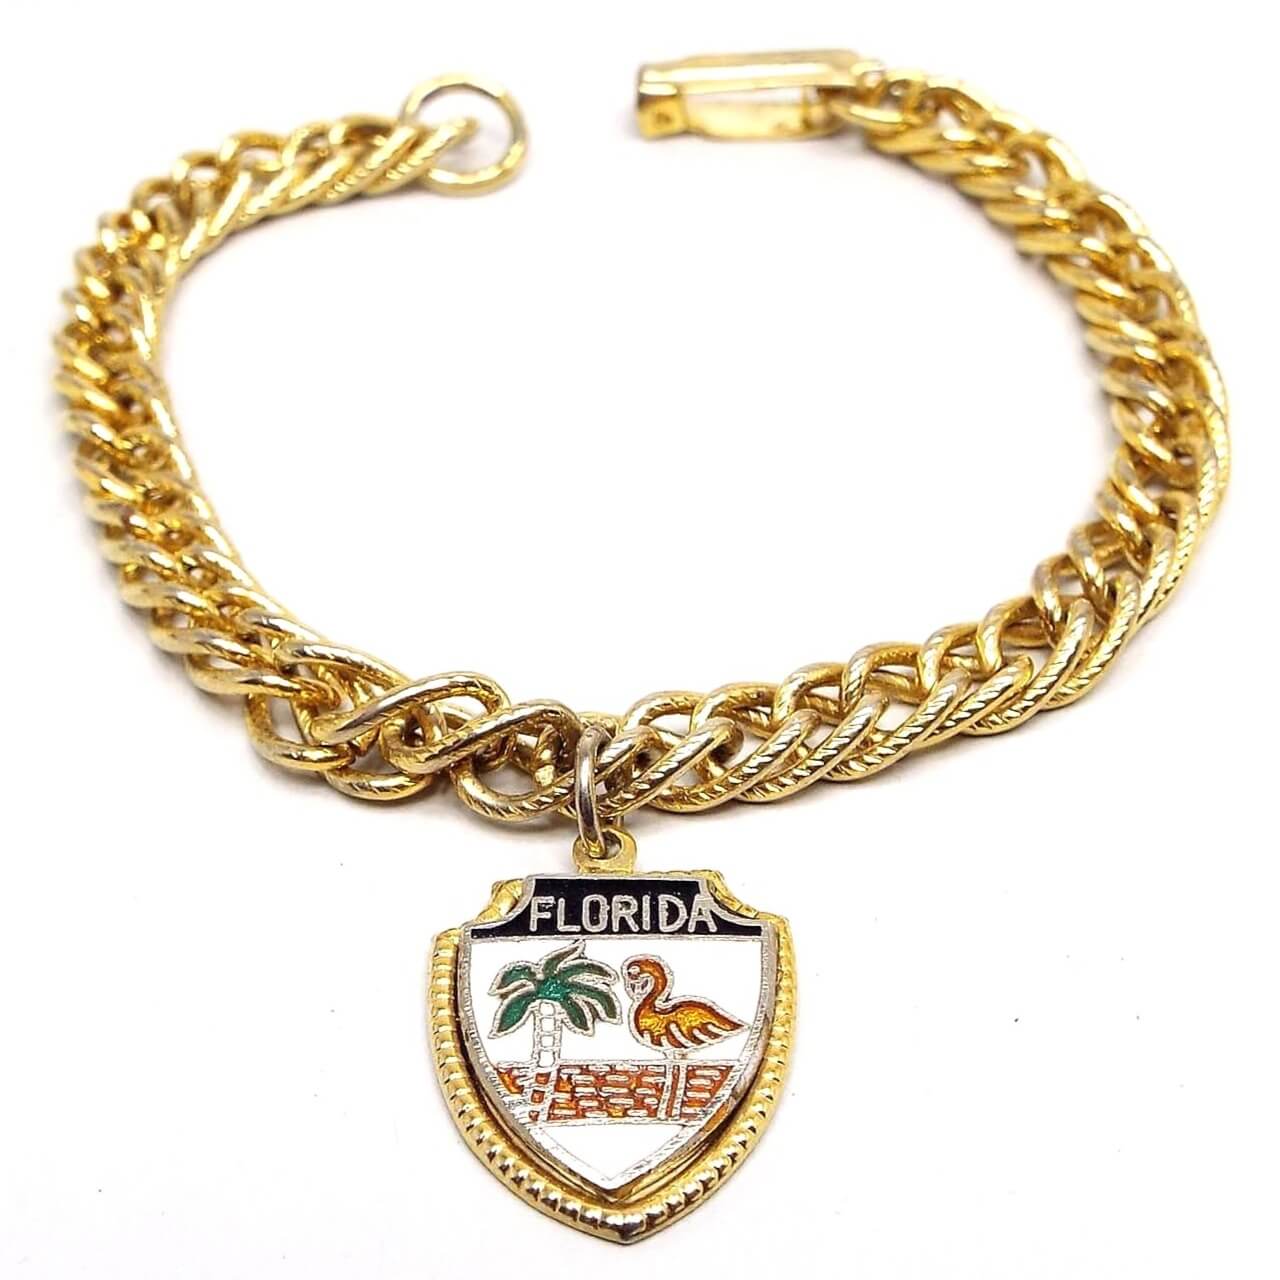 Front view of the retro vintage charm bracelet. The chain is gold tone in color and has a curb link chain. The charm at the bottom is shaped like a shield and has Florida at the top with a palm tree and a flamingo on it. 